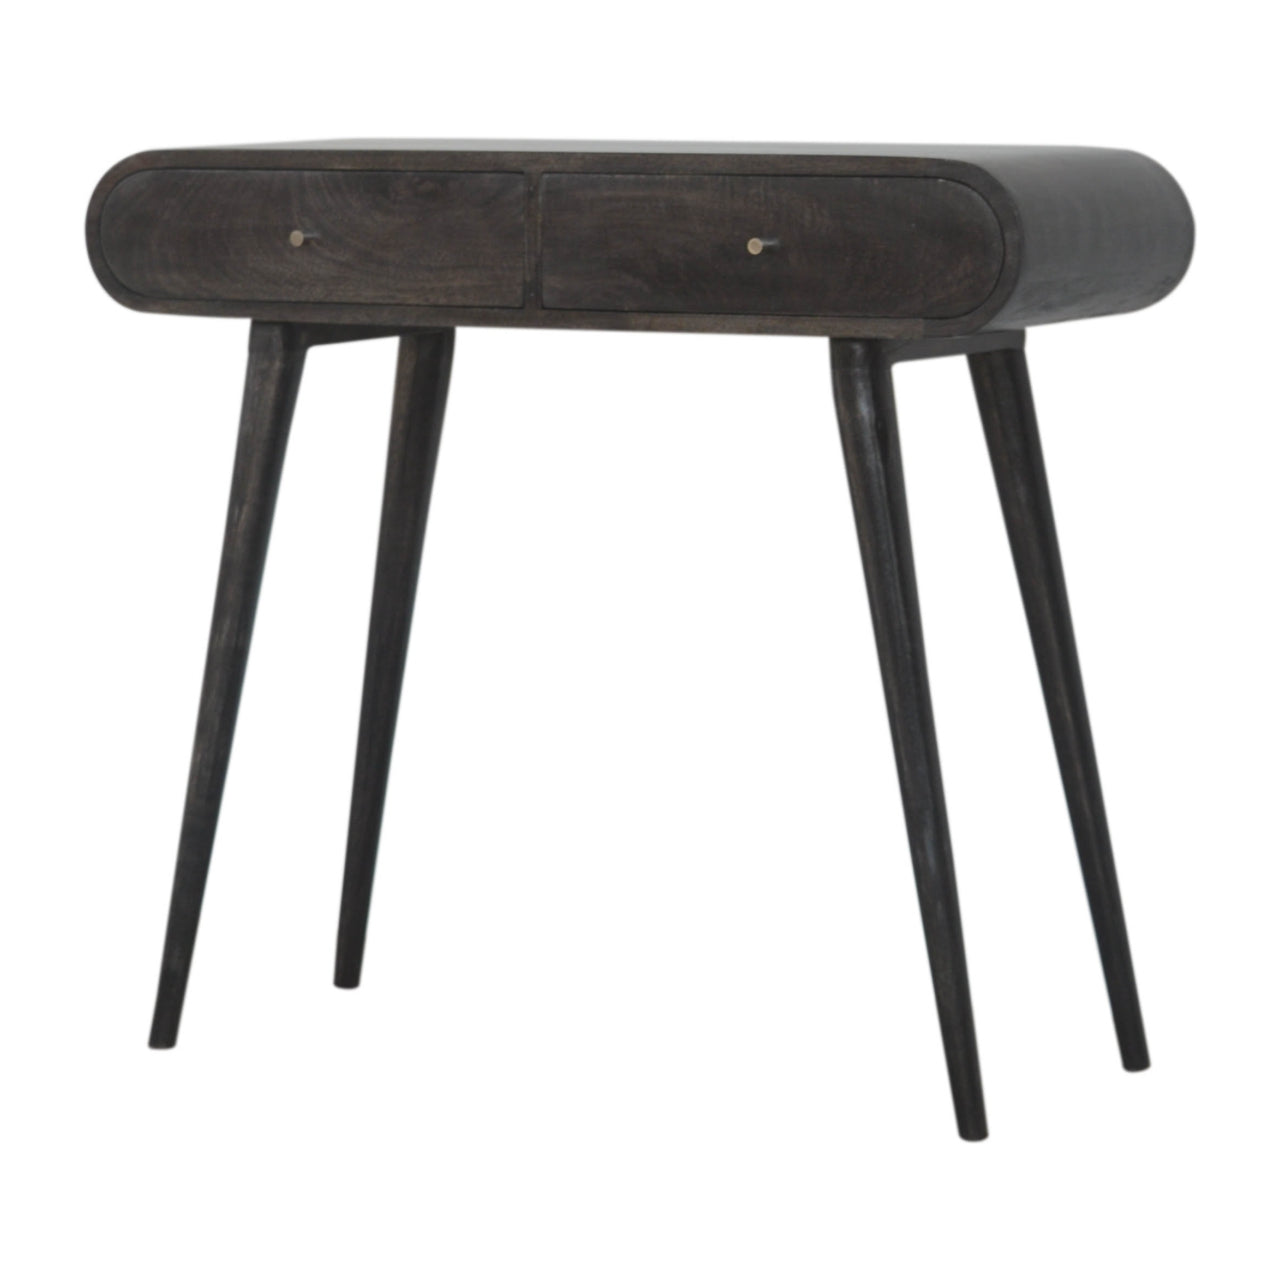 Ash Black Curved Edge Console Table - mancavesuperstore